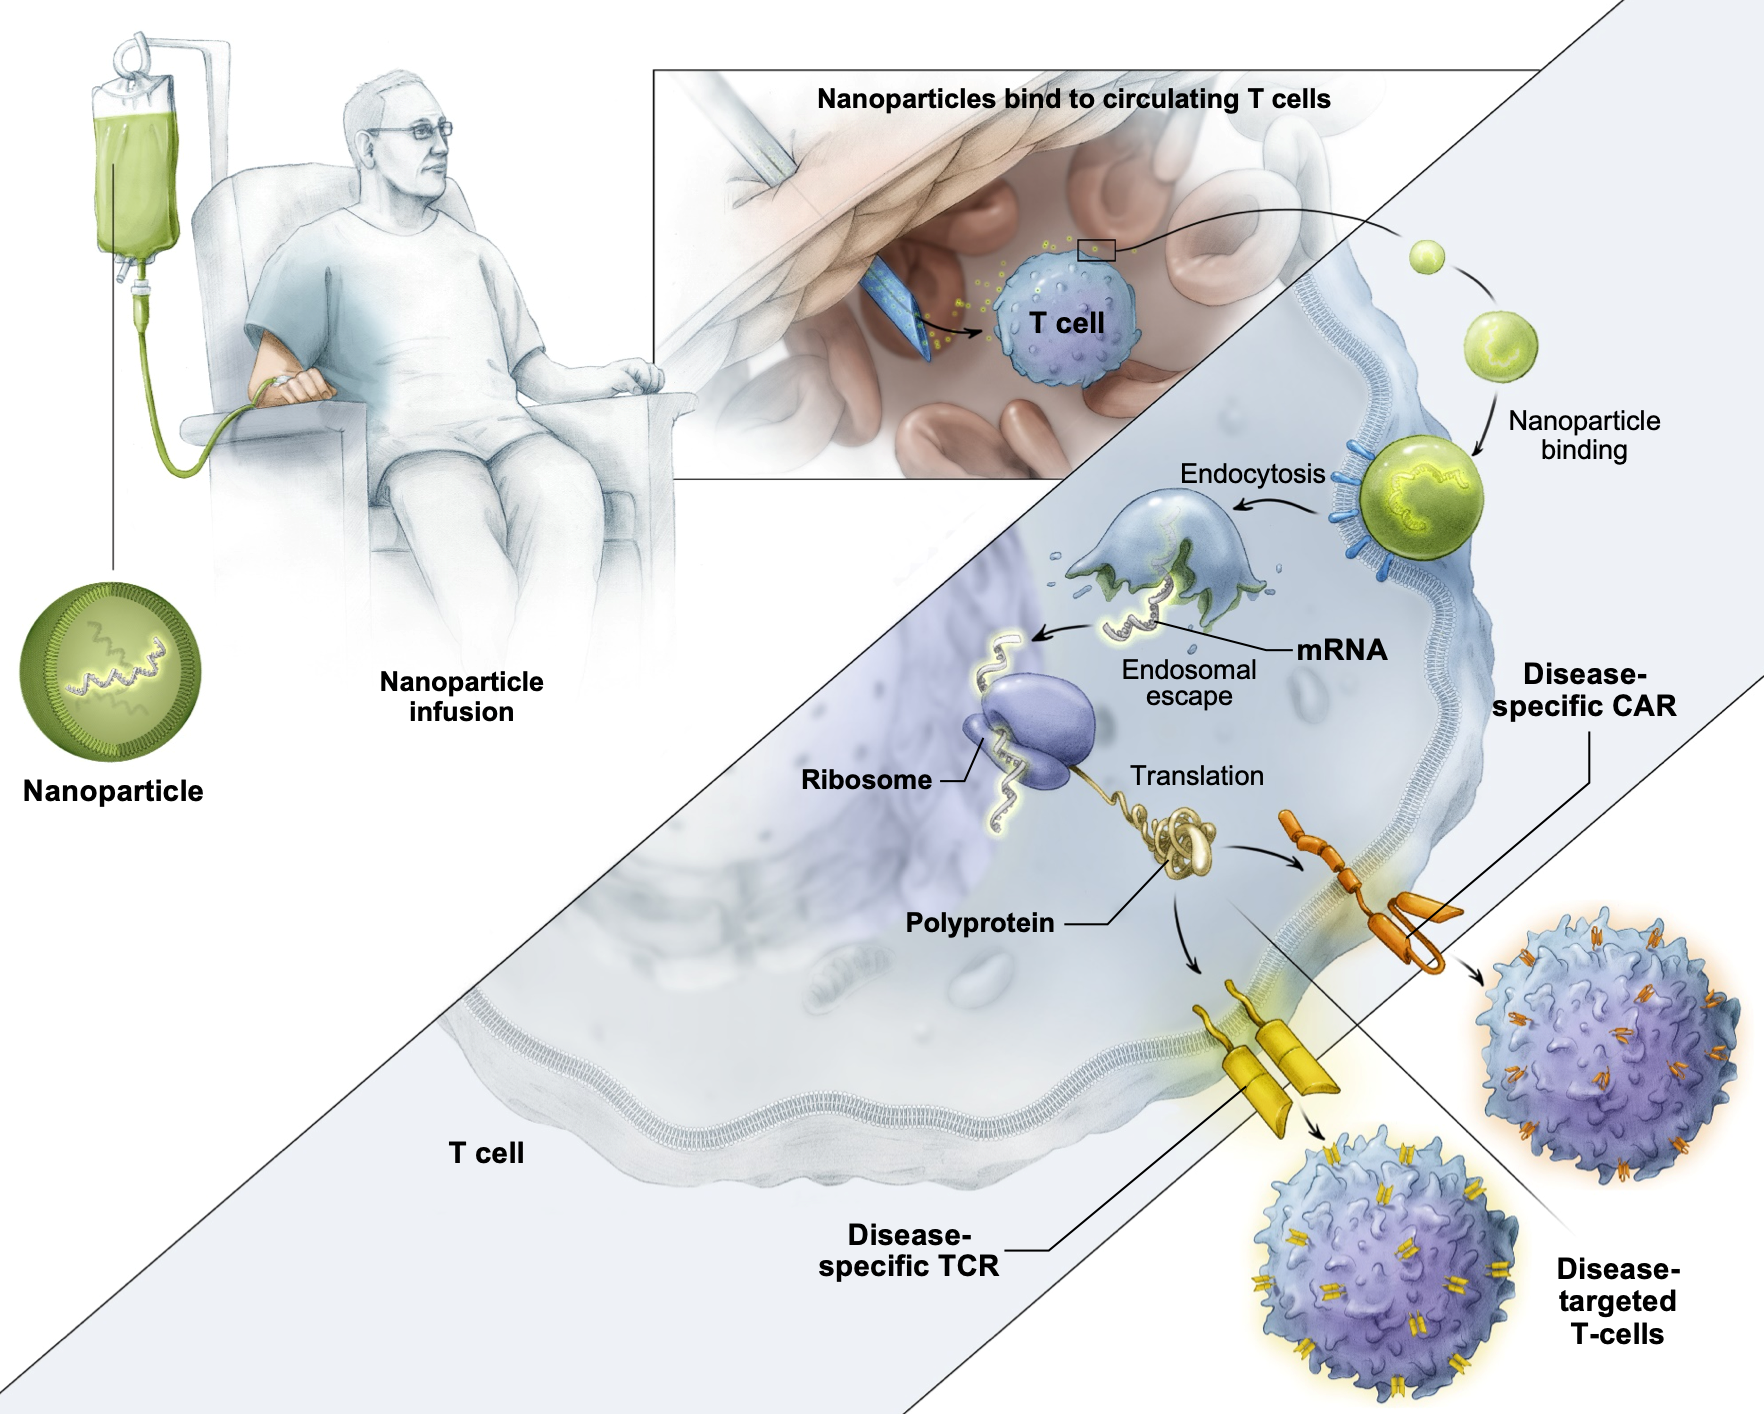 Engineered nanoparticles filled with mRNA and coated with antibodies target a patient’s T cells